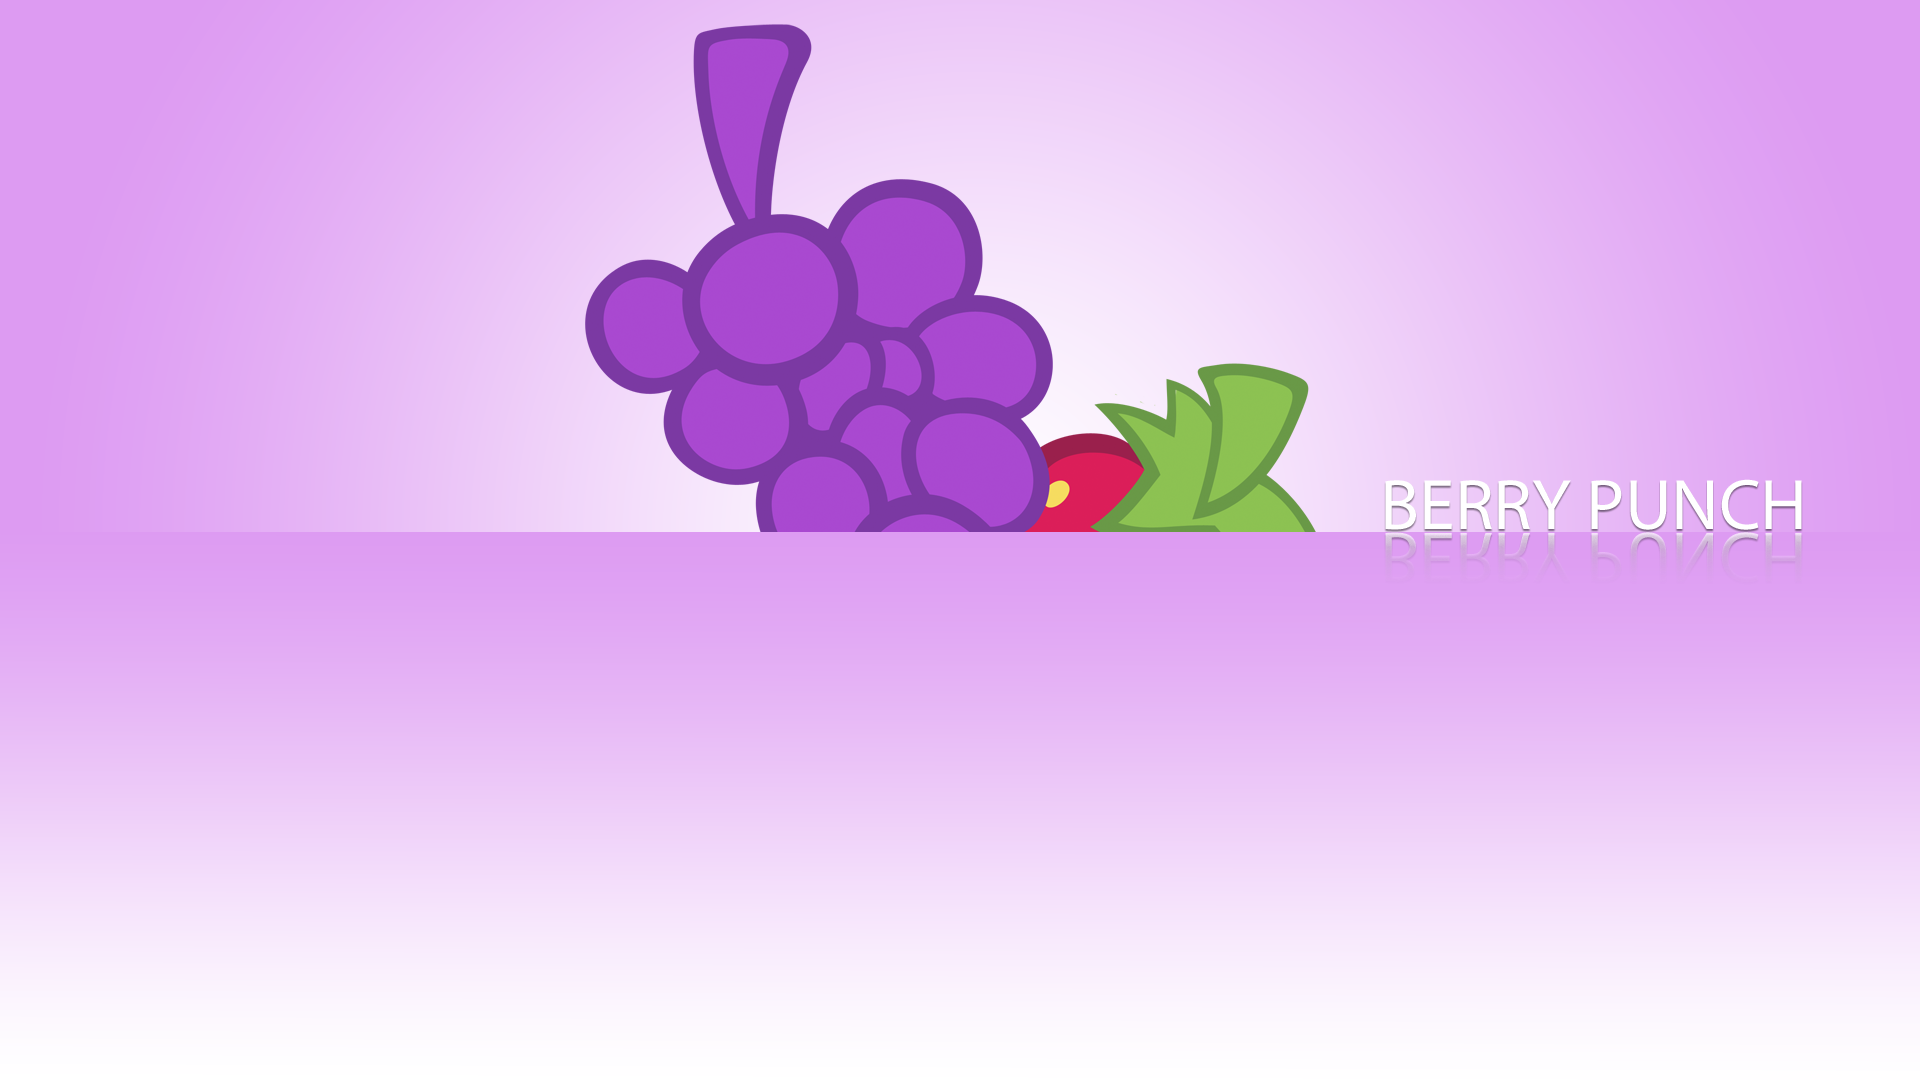 Berry Punch Minimalistic Wallpaper by BlueDragonHans